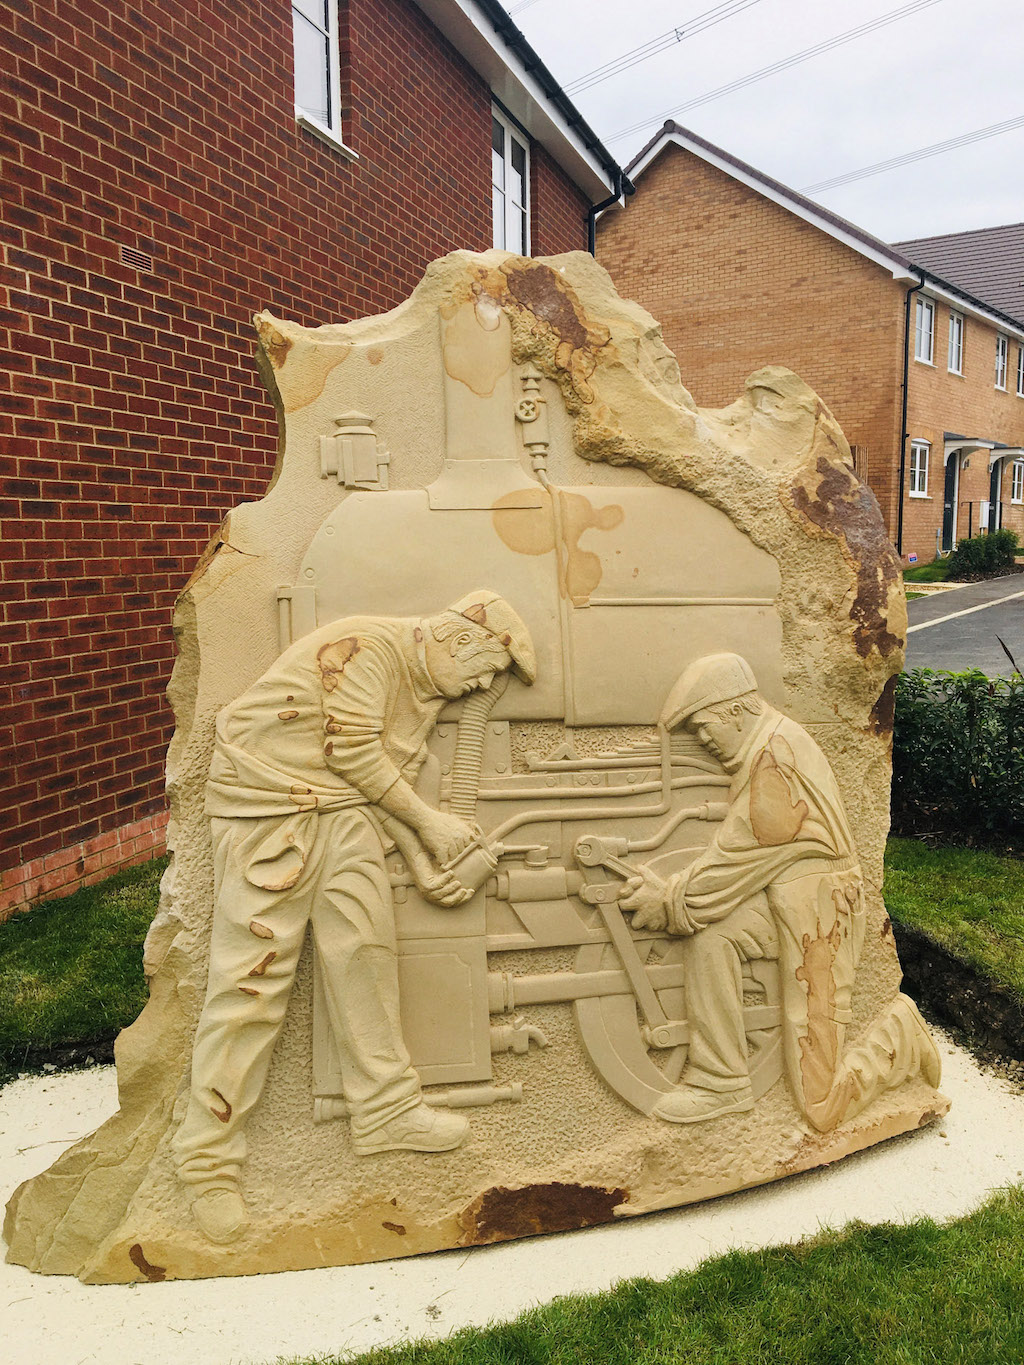 Public art takes centre stage at new affordable homes in Leighton Buzzard